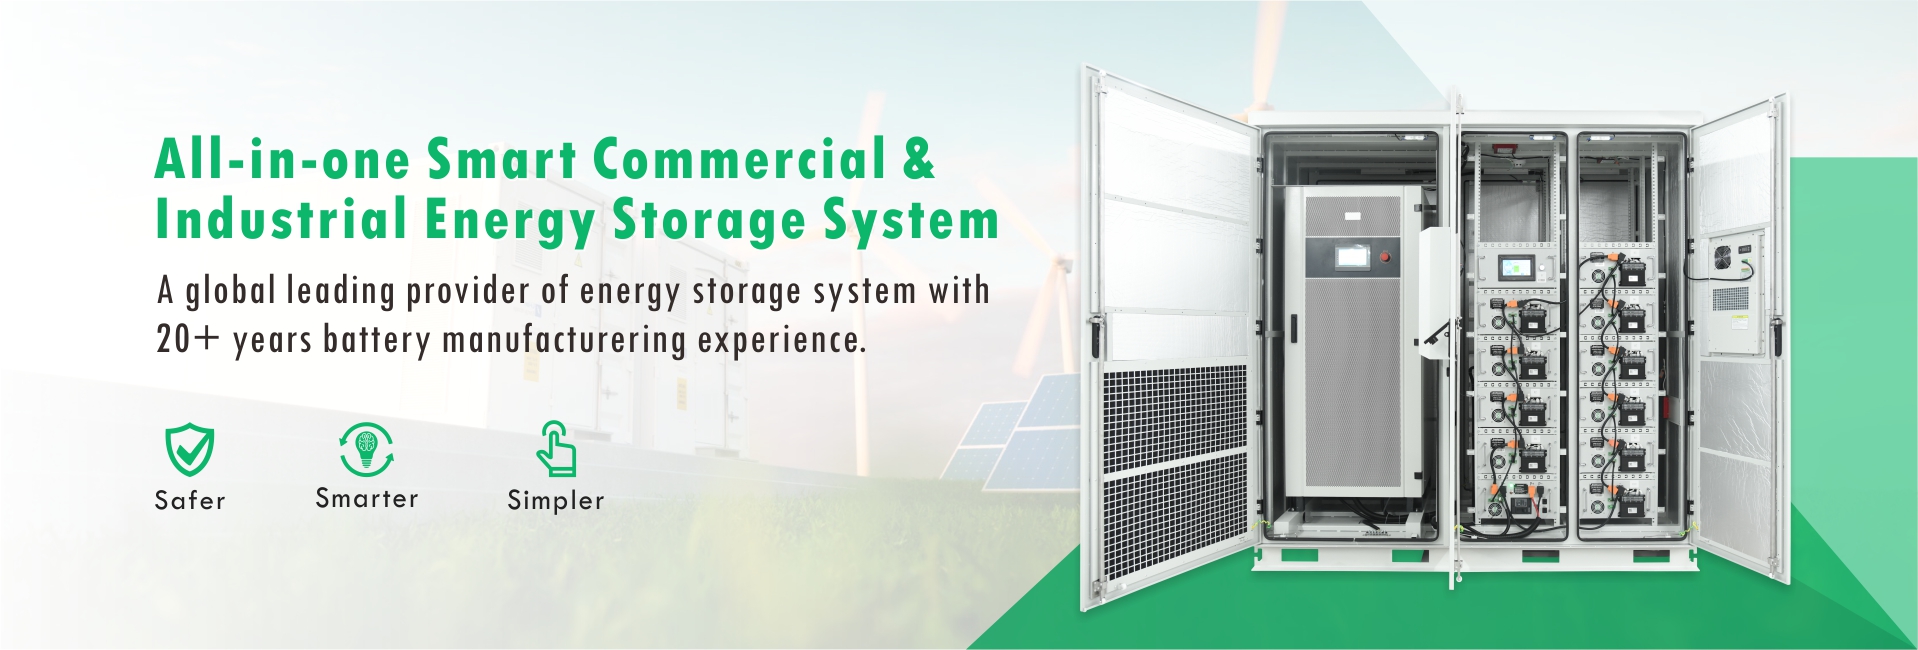 EverPower Commercial & Industrial Solar+ Energy Storage System